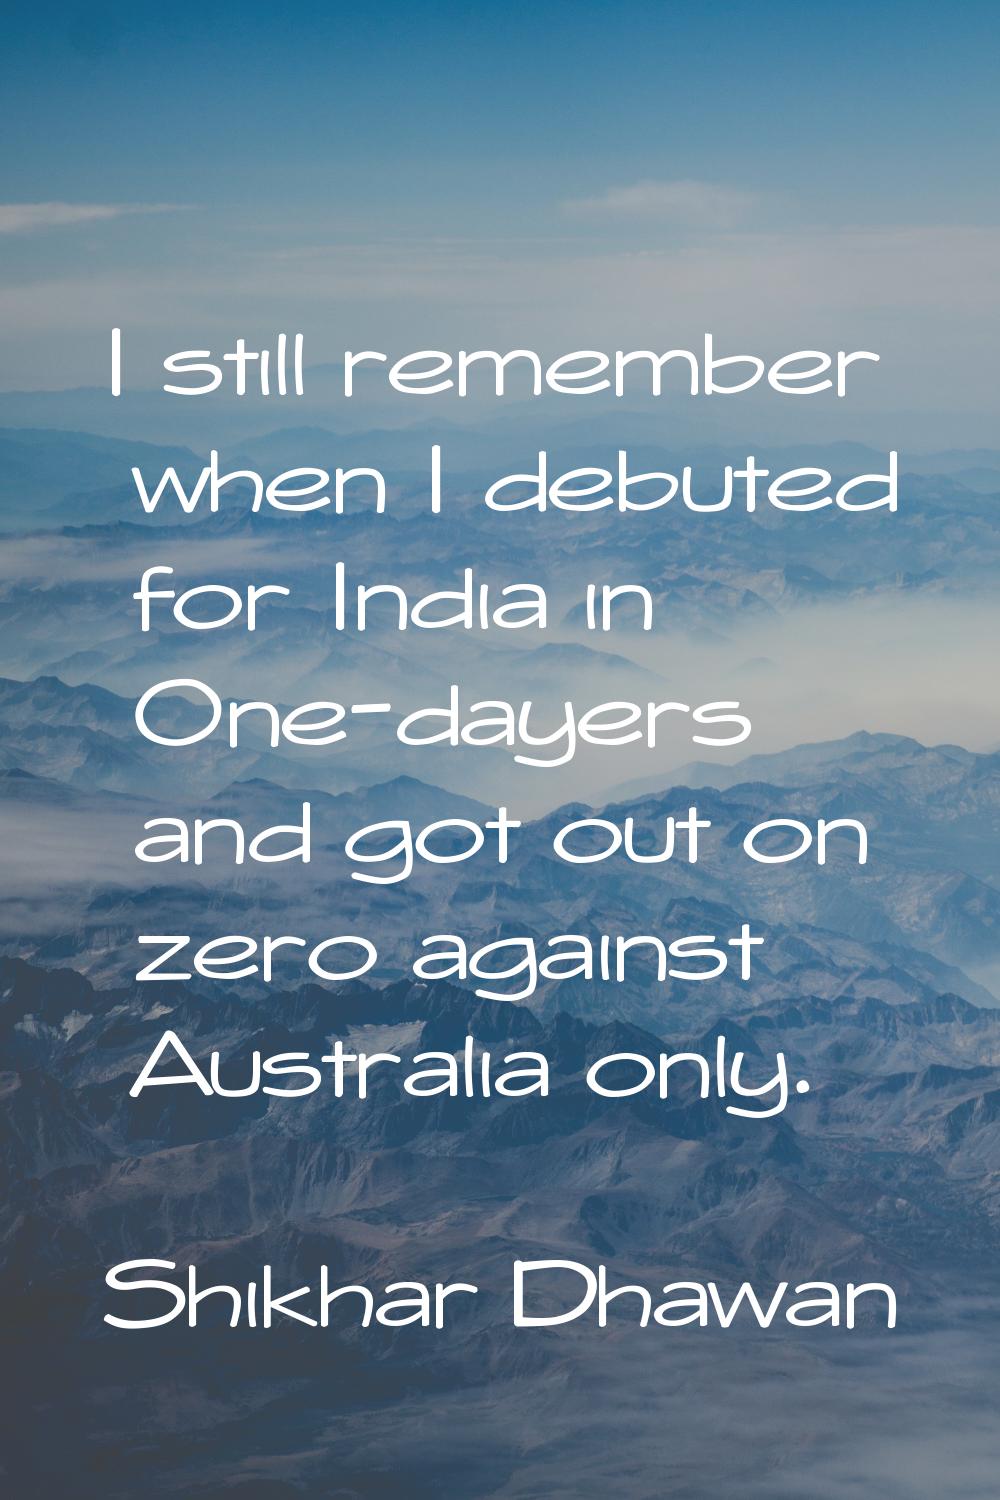 I still remember when I debuted for India in One-dayers and got out on zero against Australia only.